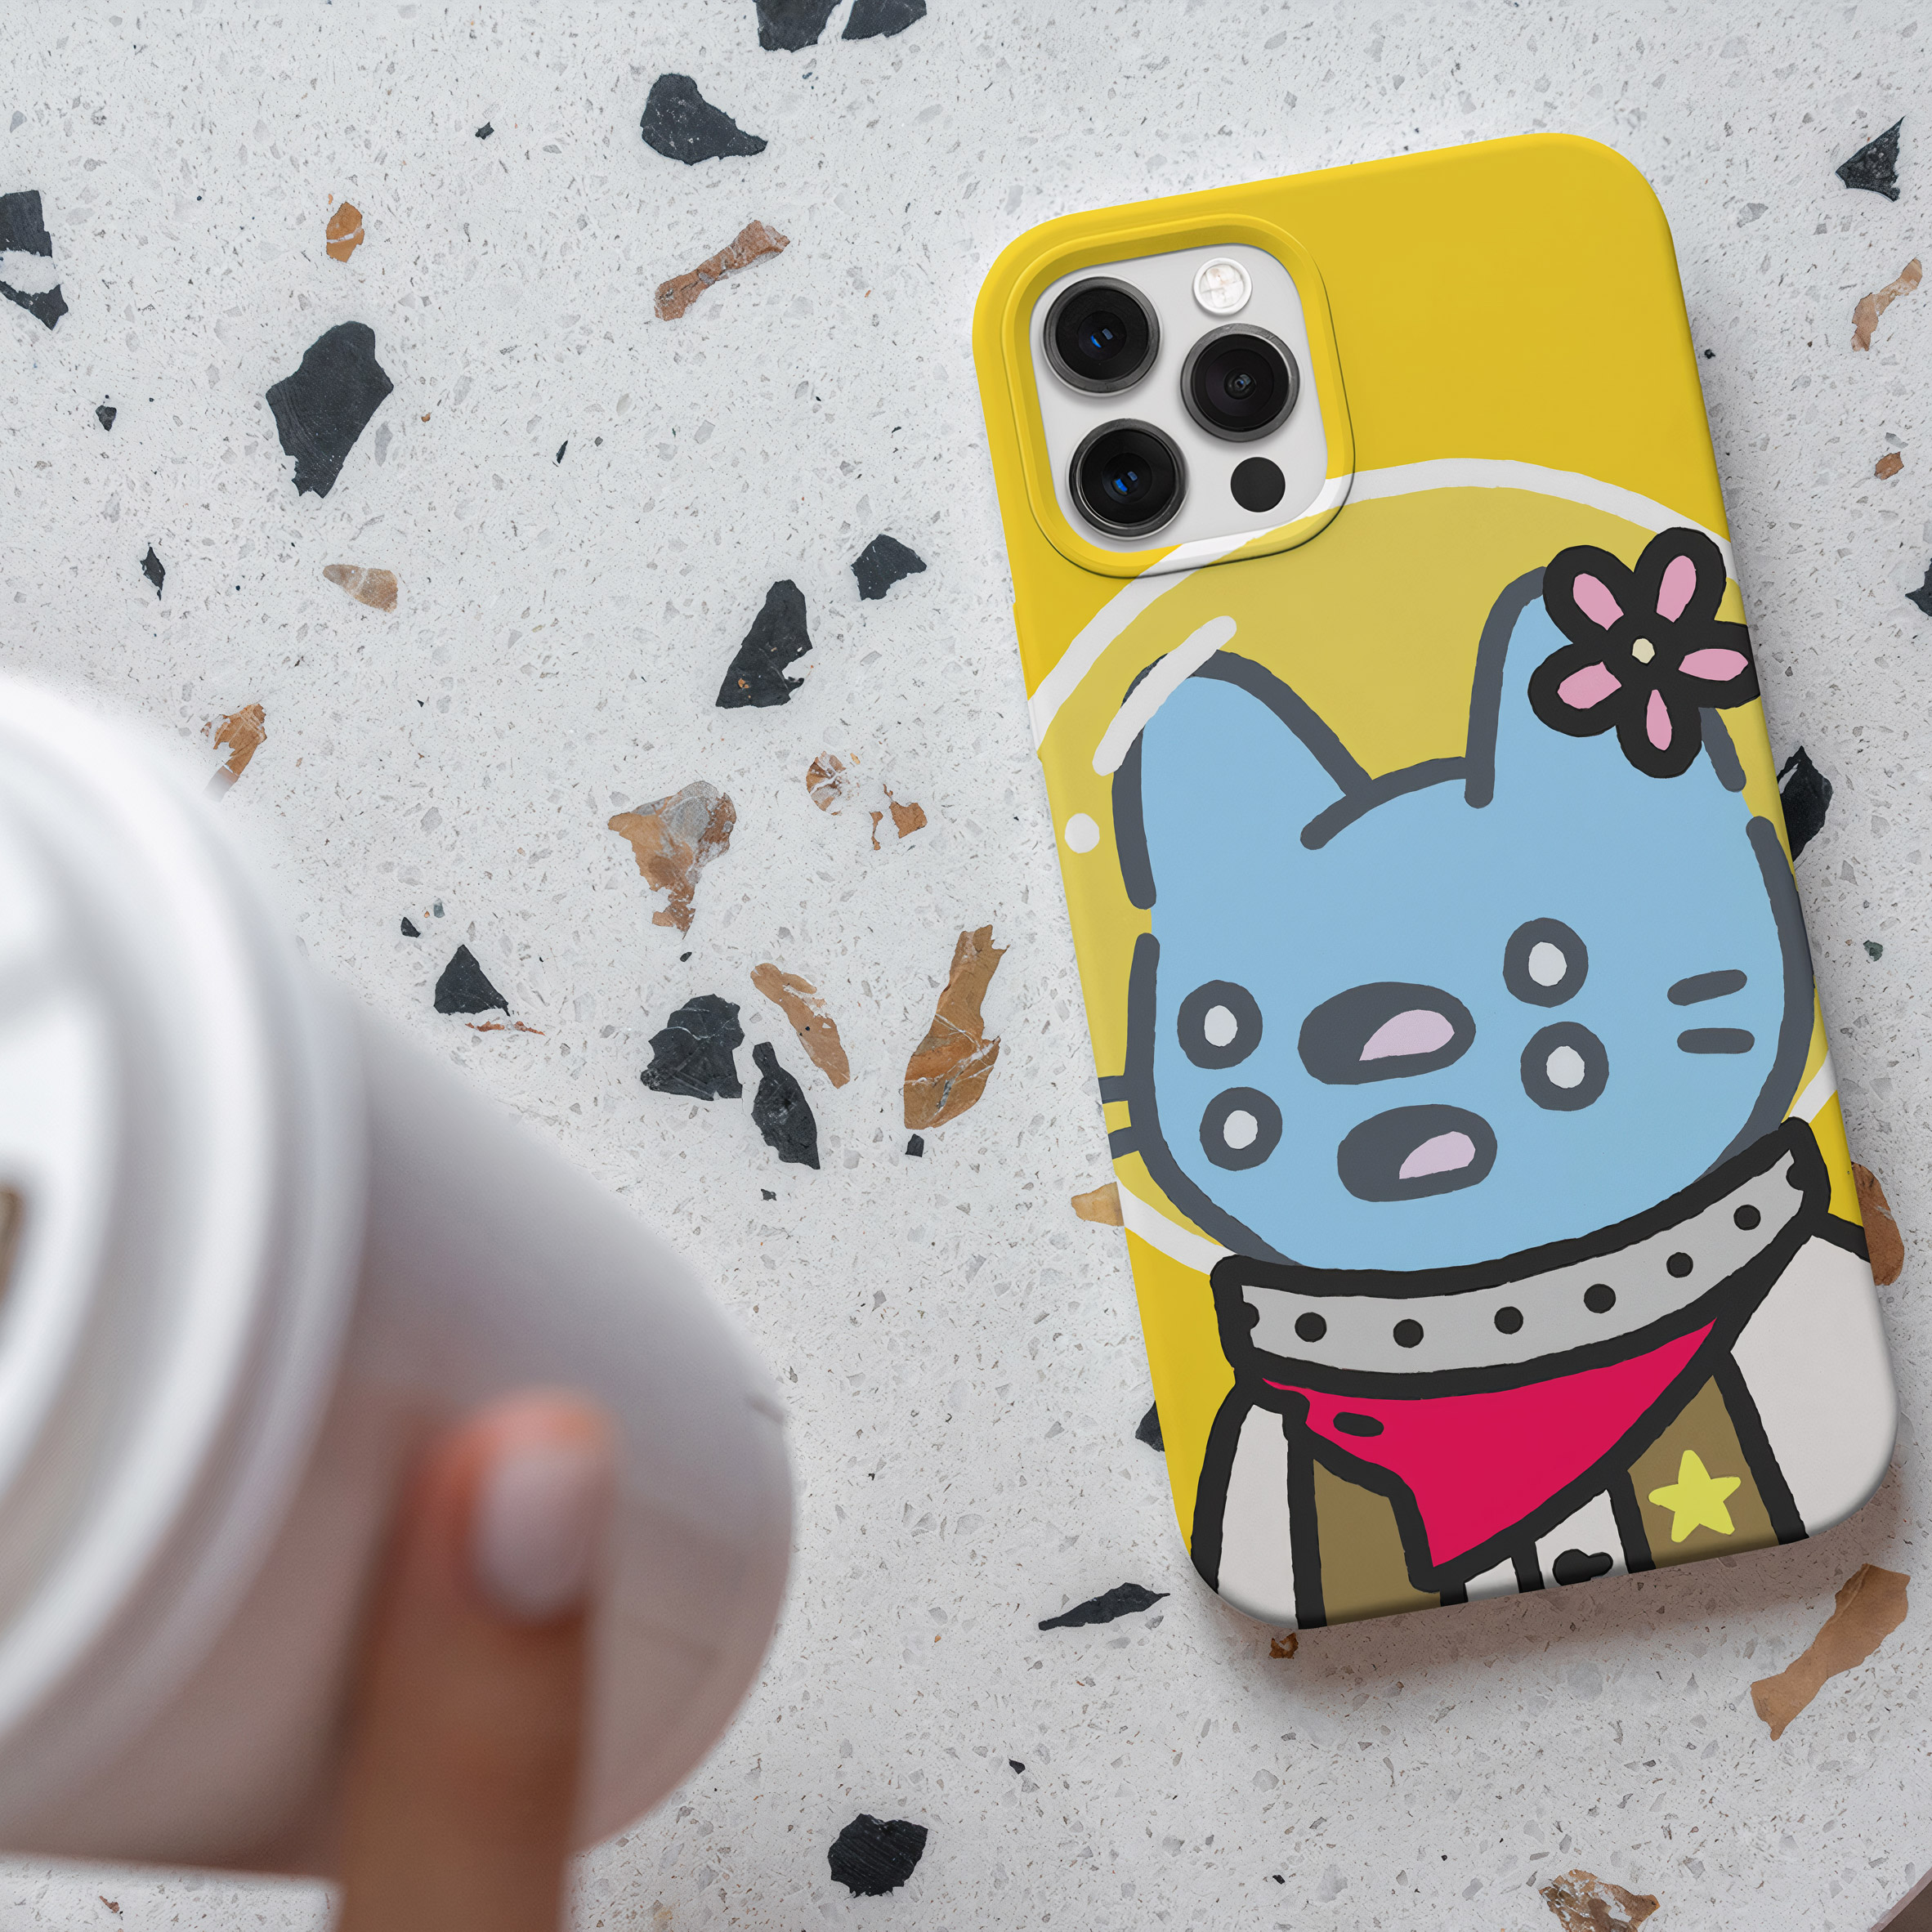 A photograph of a phone case which has a cartoon on its cover